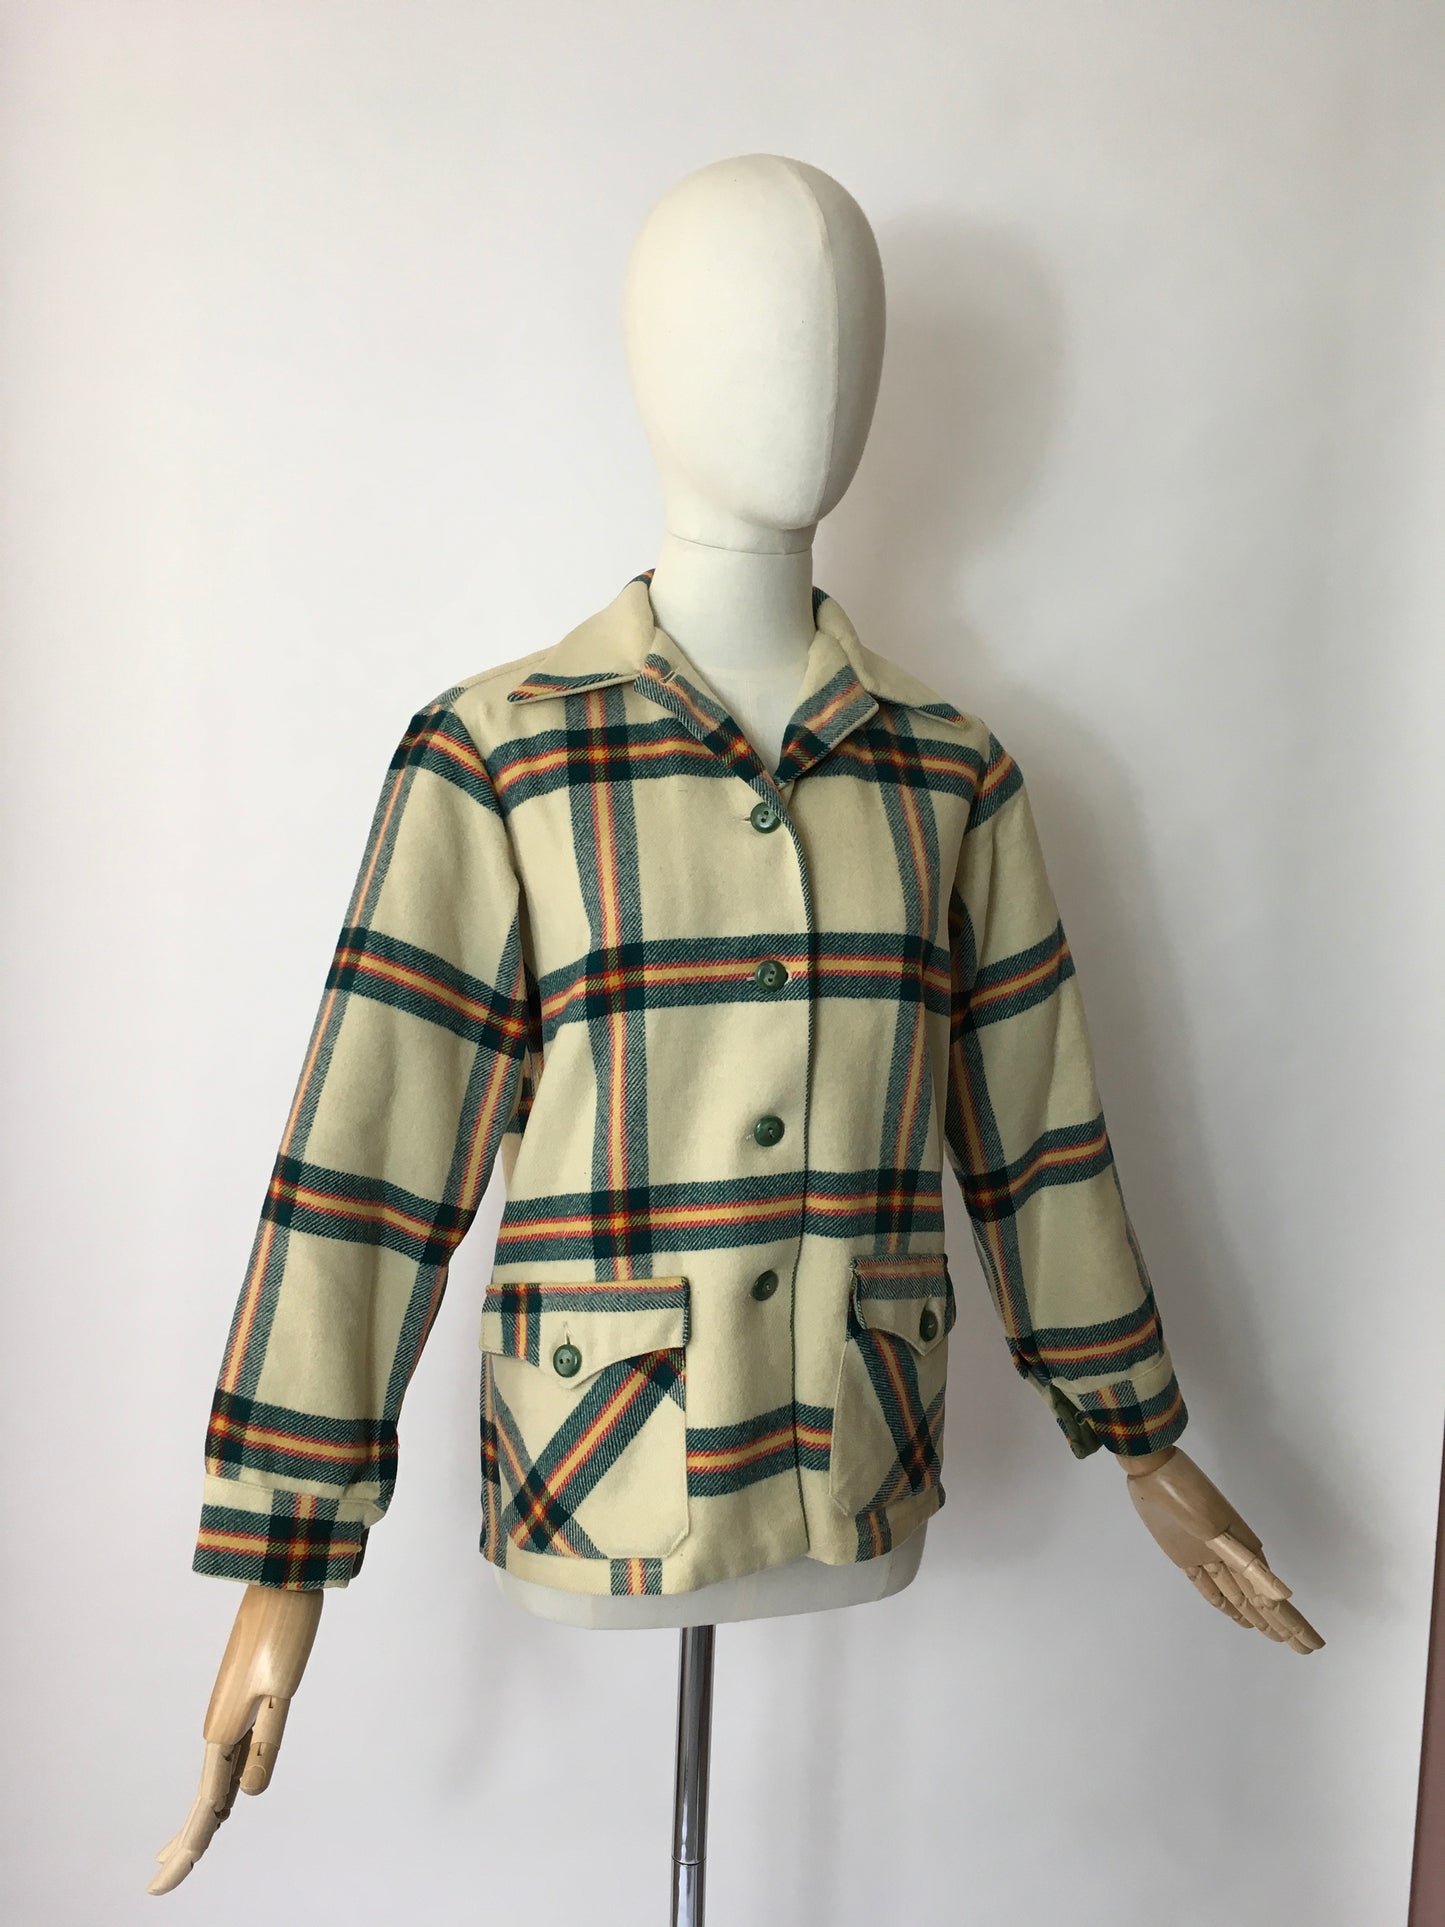 Original 1940’s American Jacket - In a lovely Plaid In Red, Green & Yellow on a Soft Cream